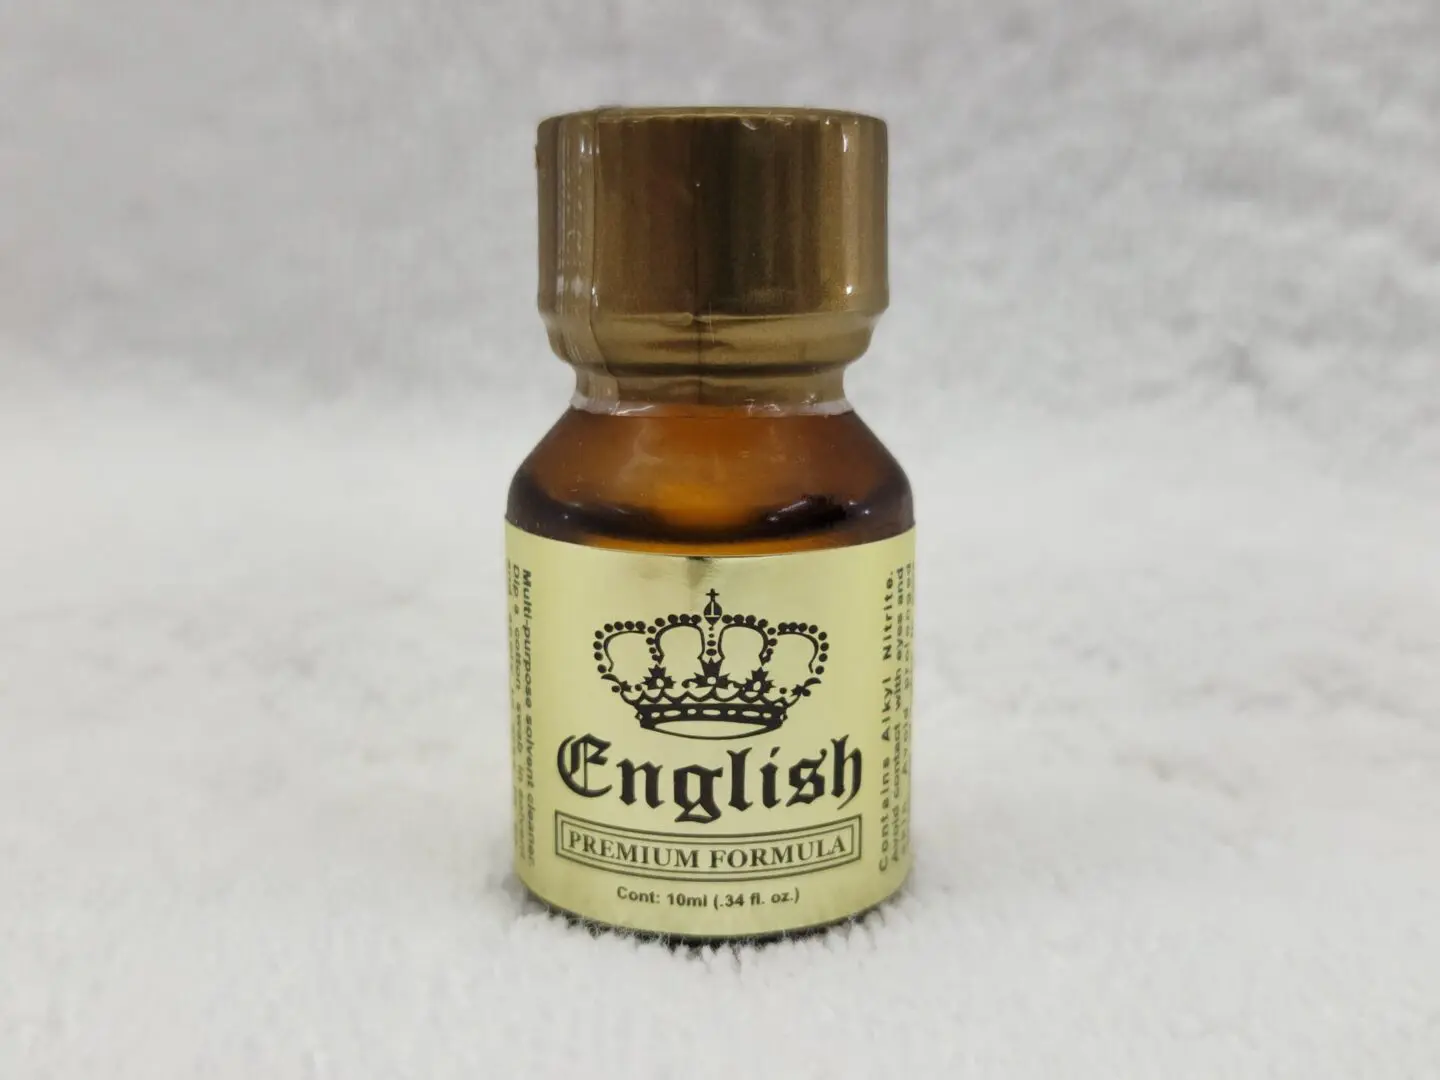 A bottle of english potions on top of white background.